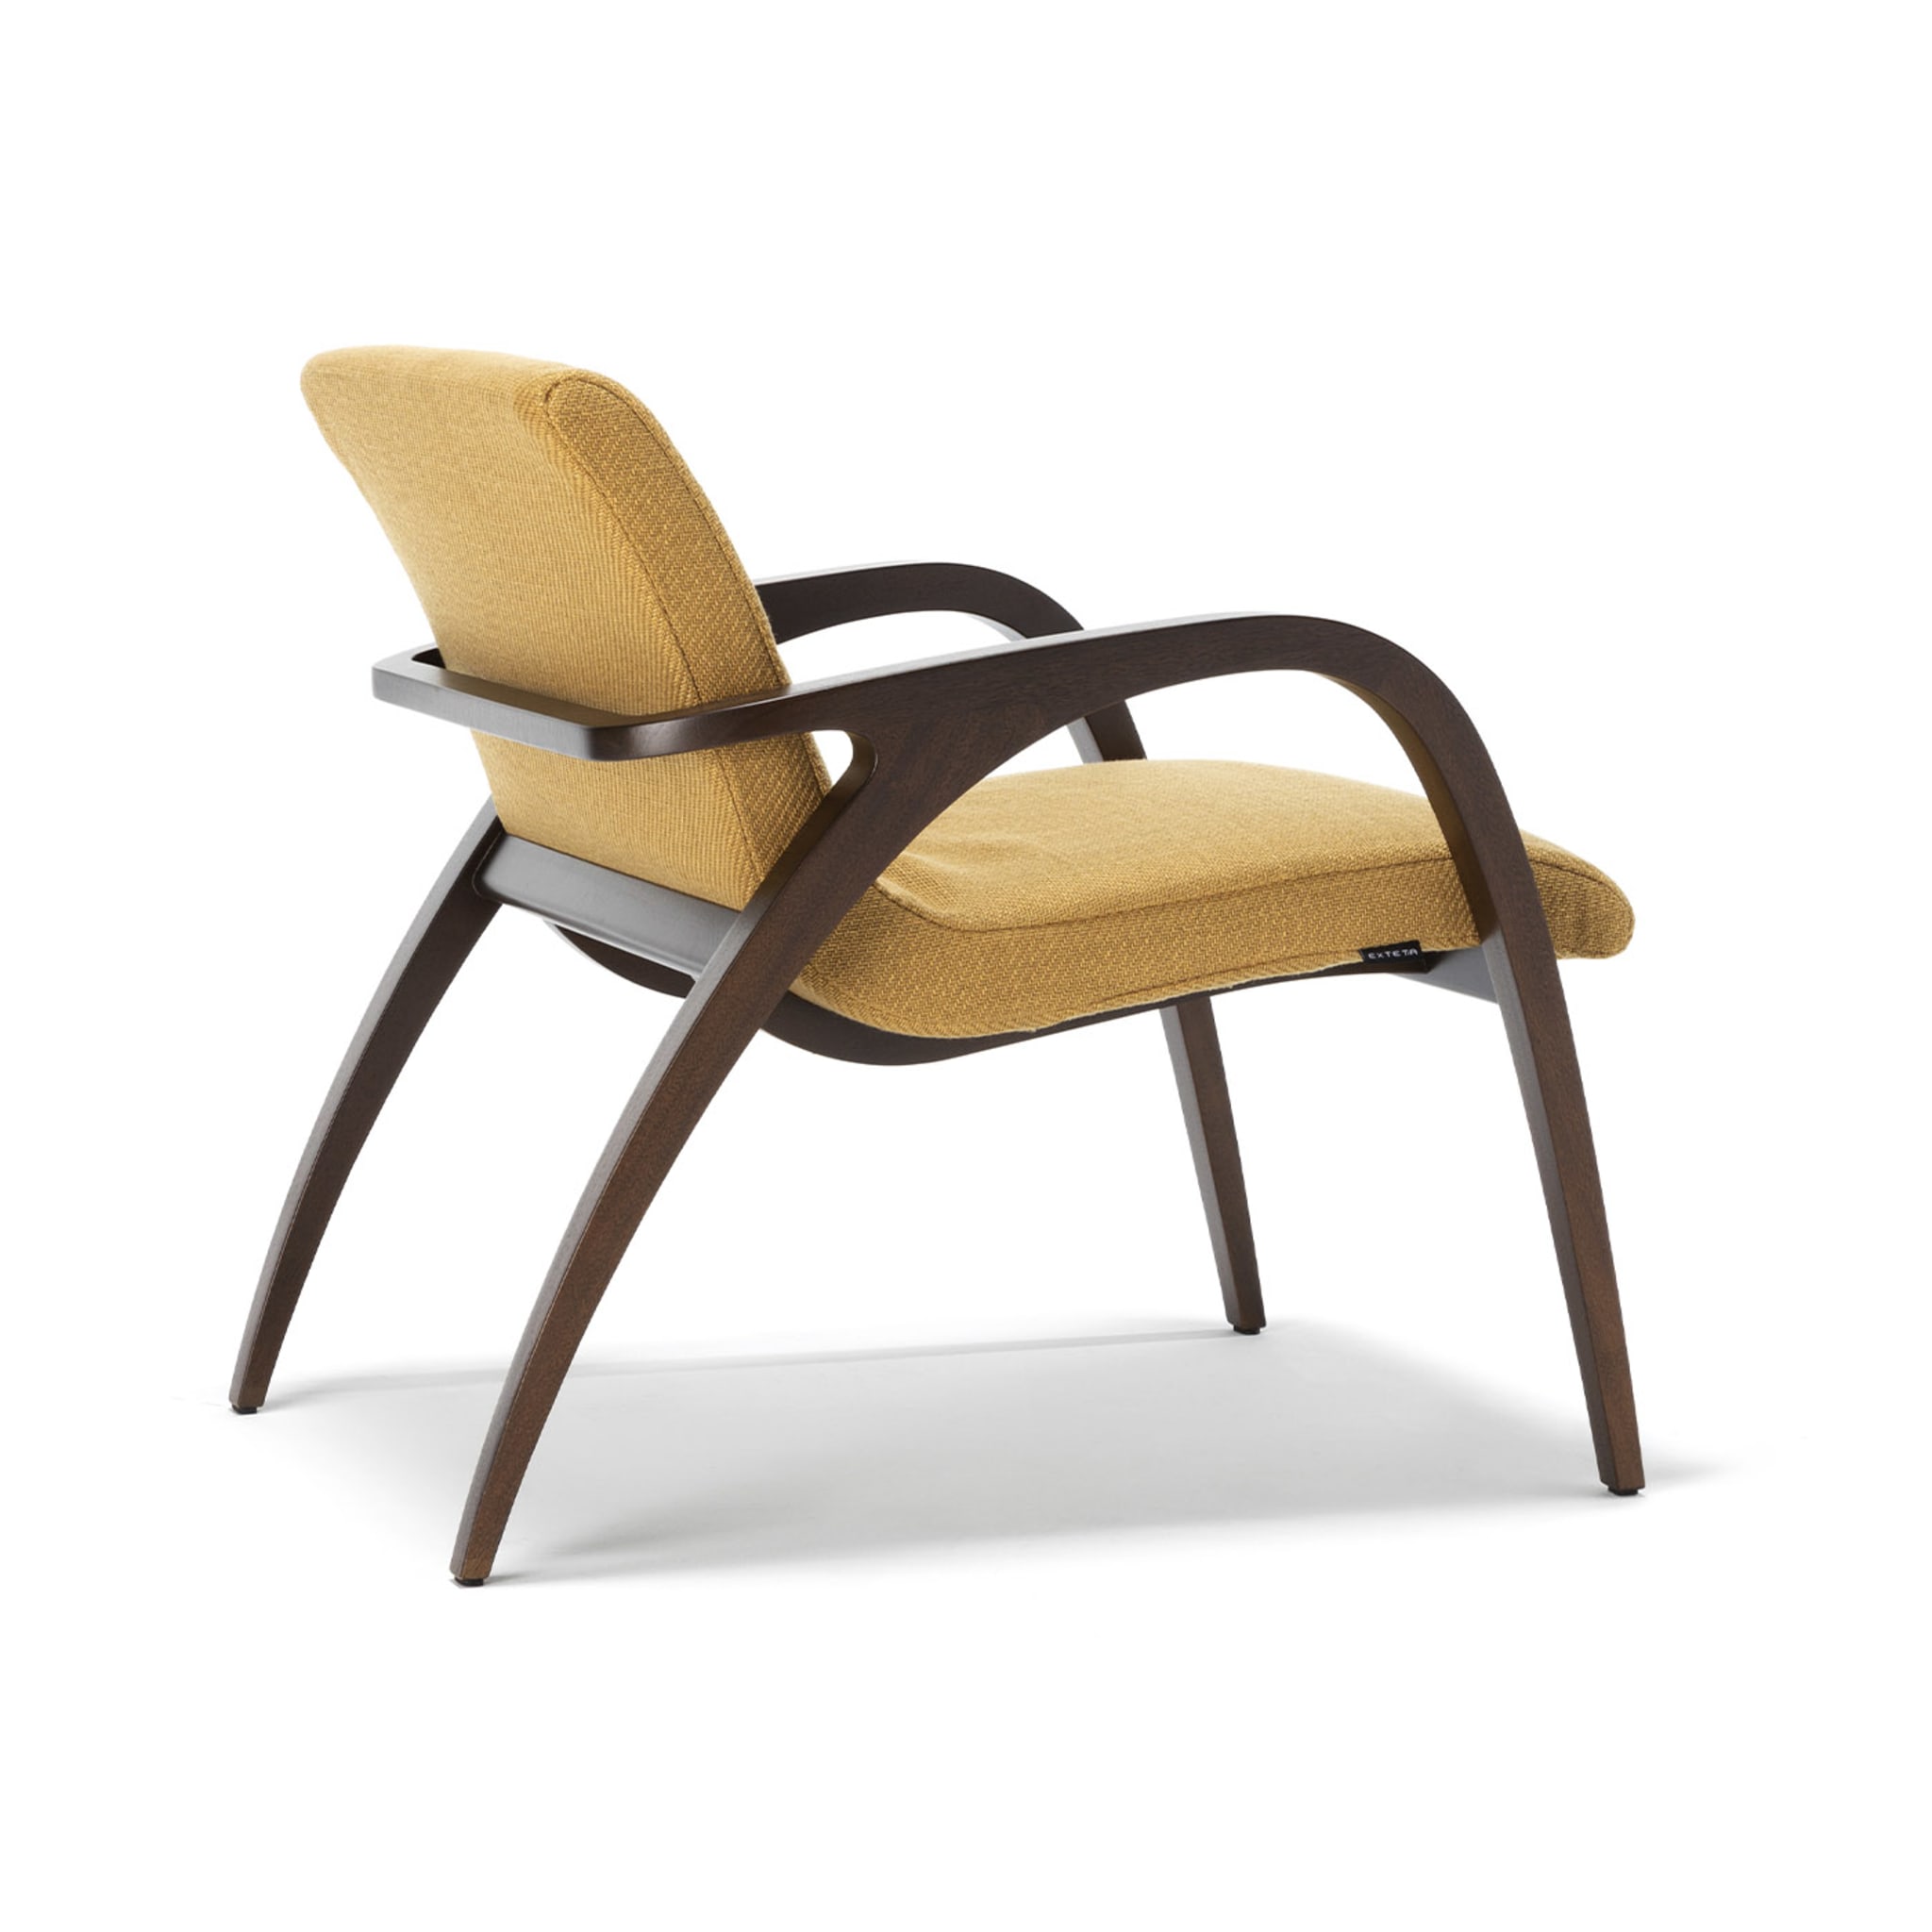 1938 Ginger & Brown Armchair by Franco Albini - Alternative view 5